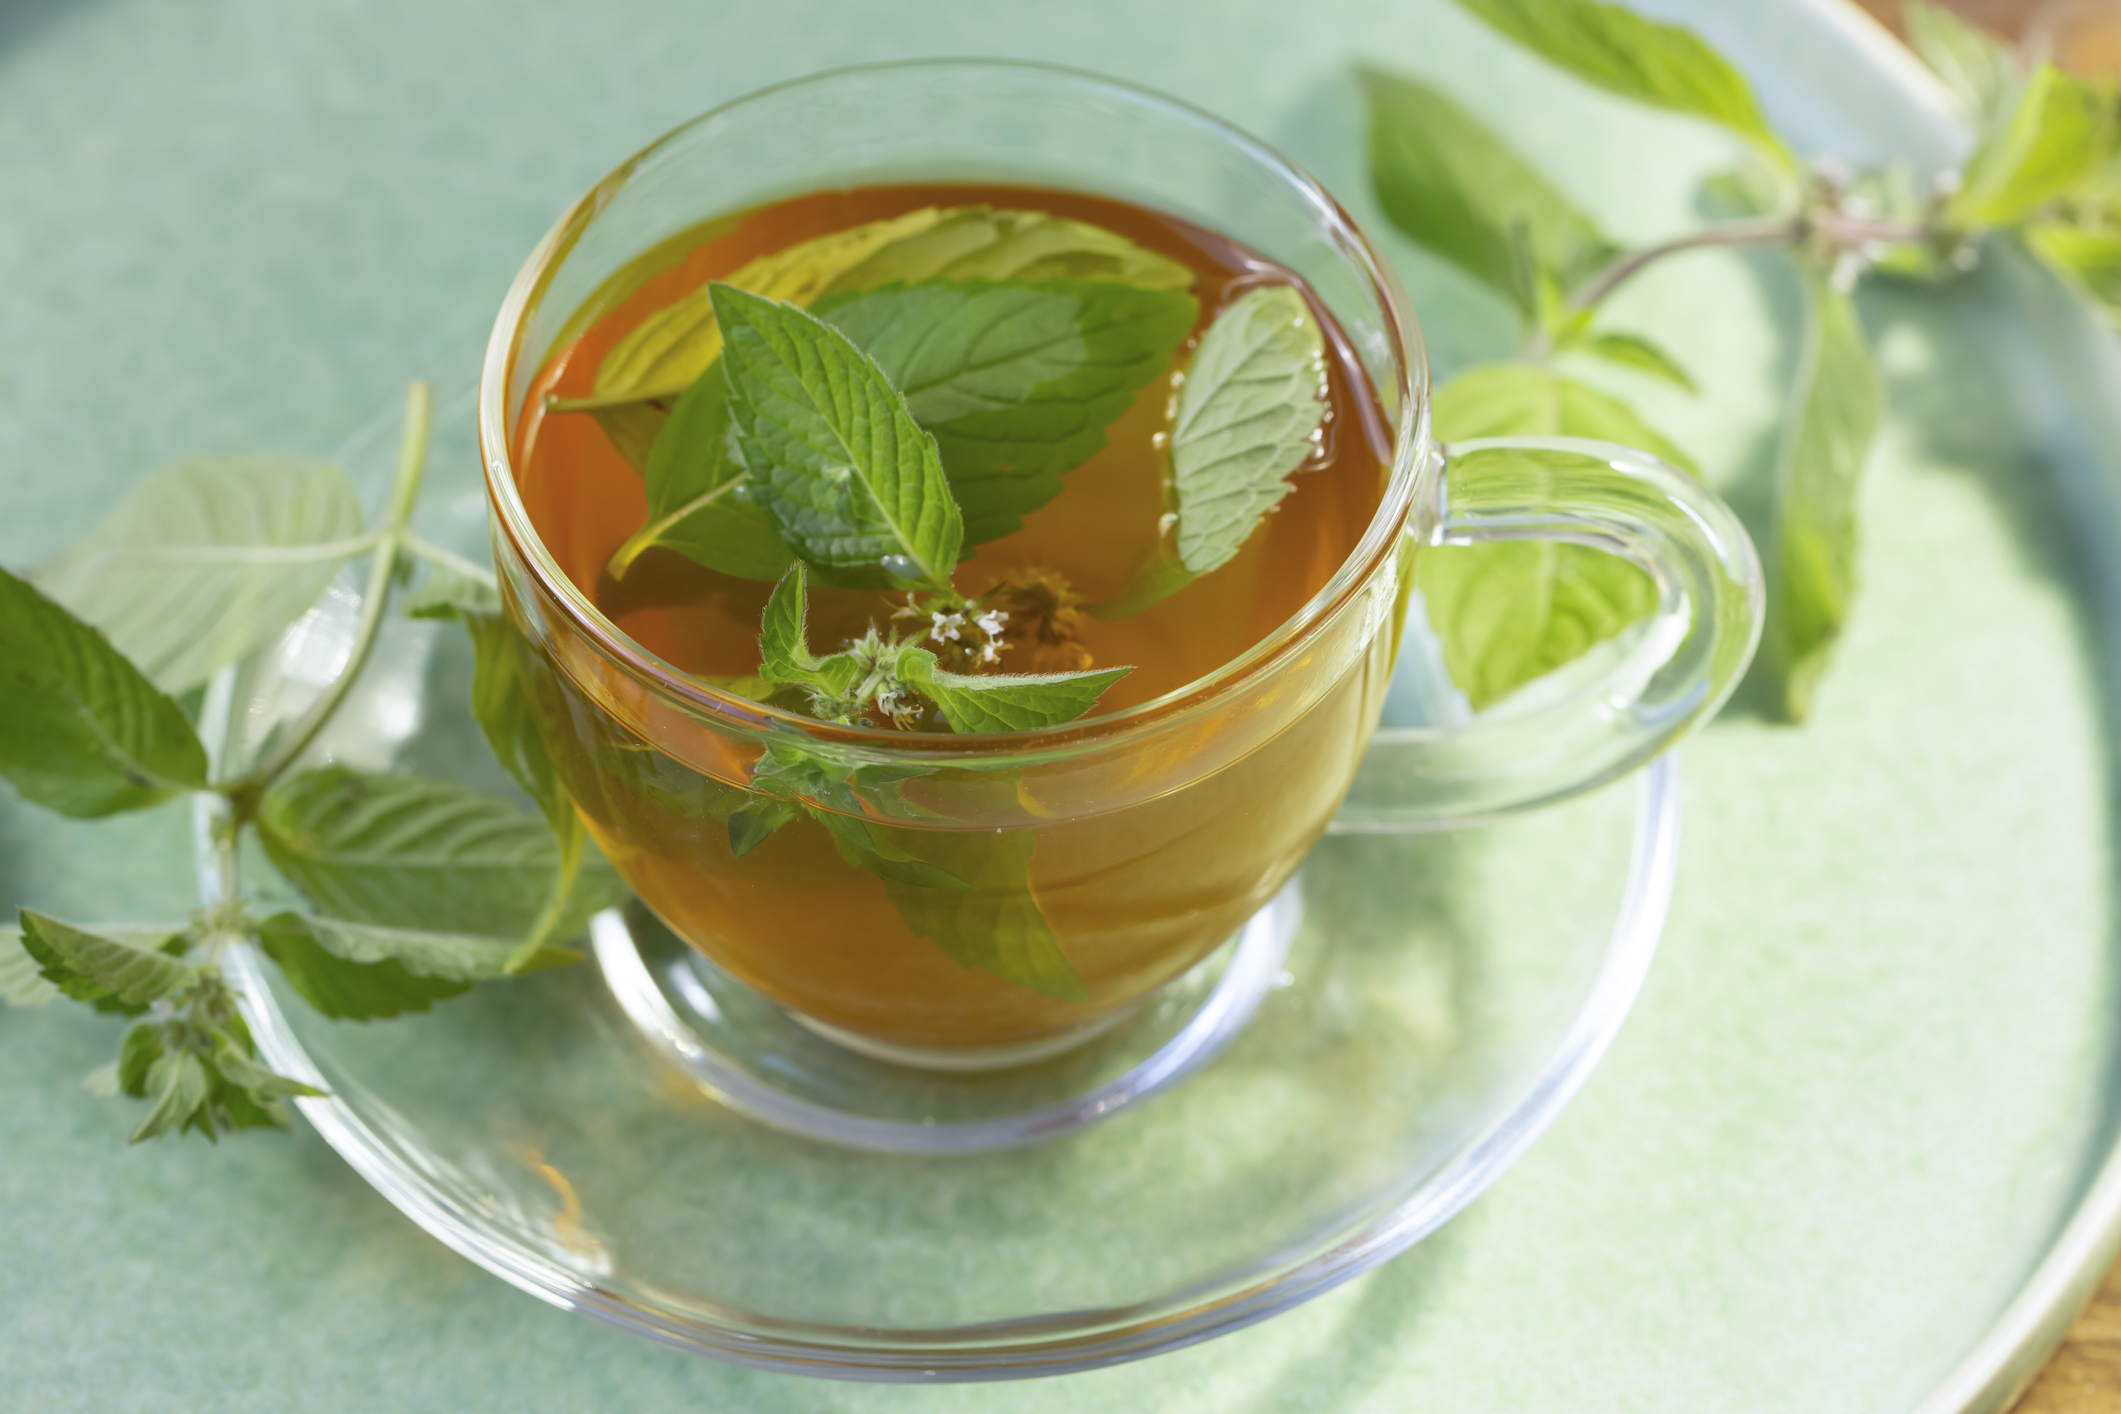 Cup of Green Tea with Mint Leaves | Mindfulness Tips